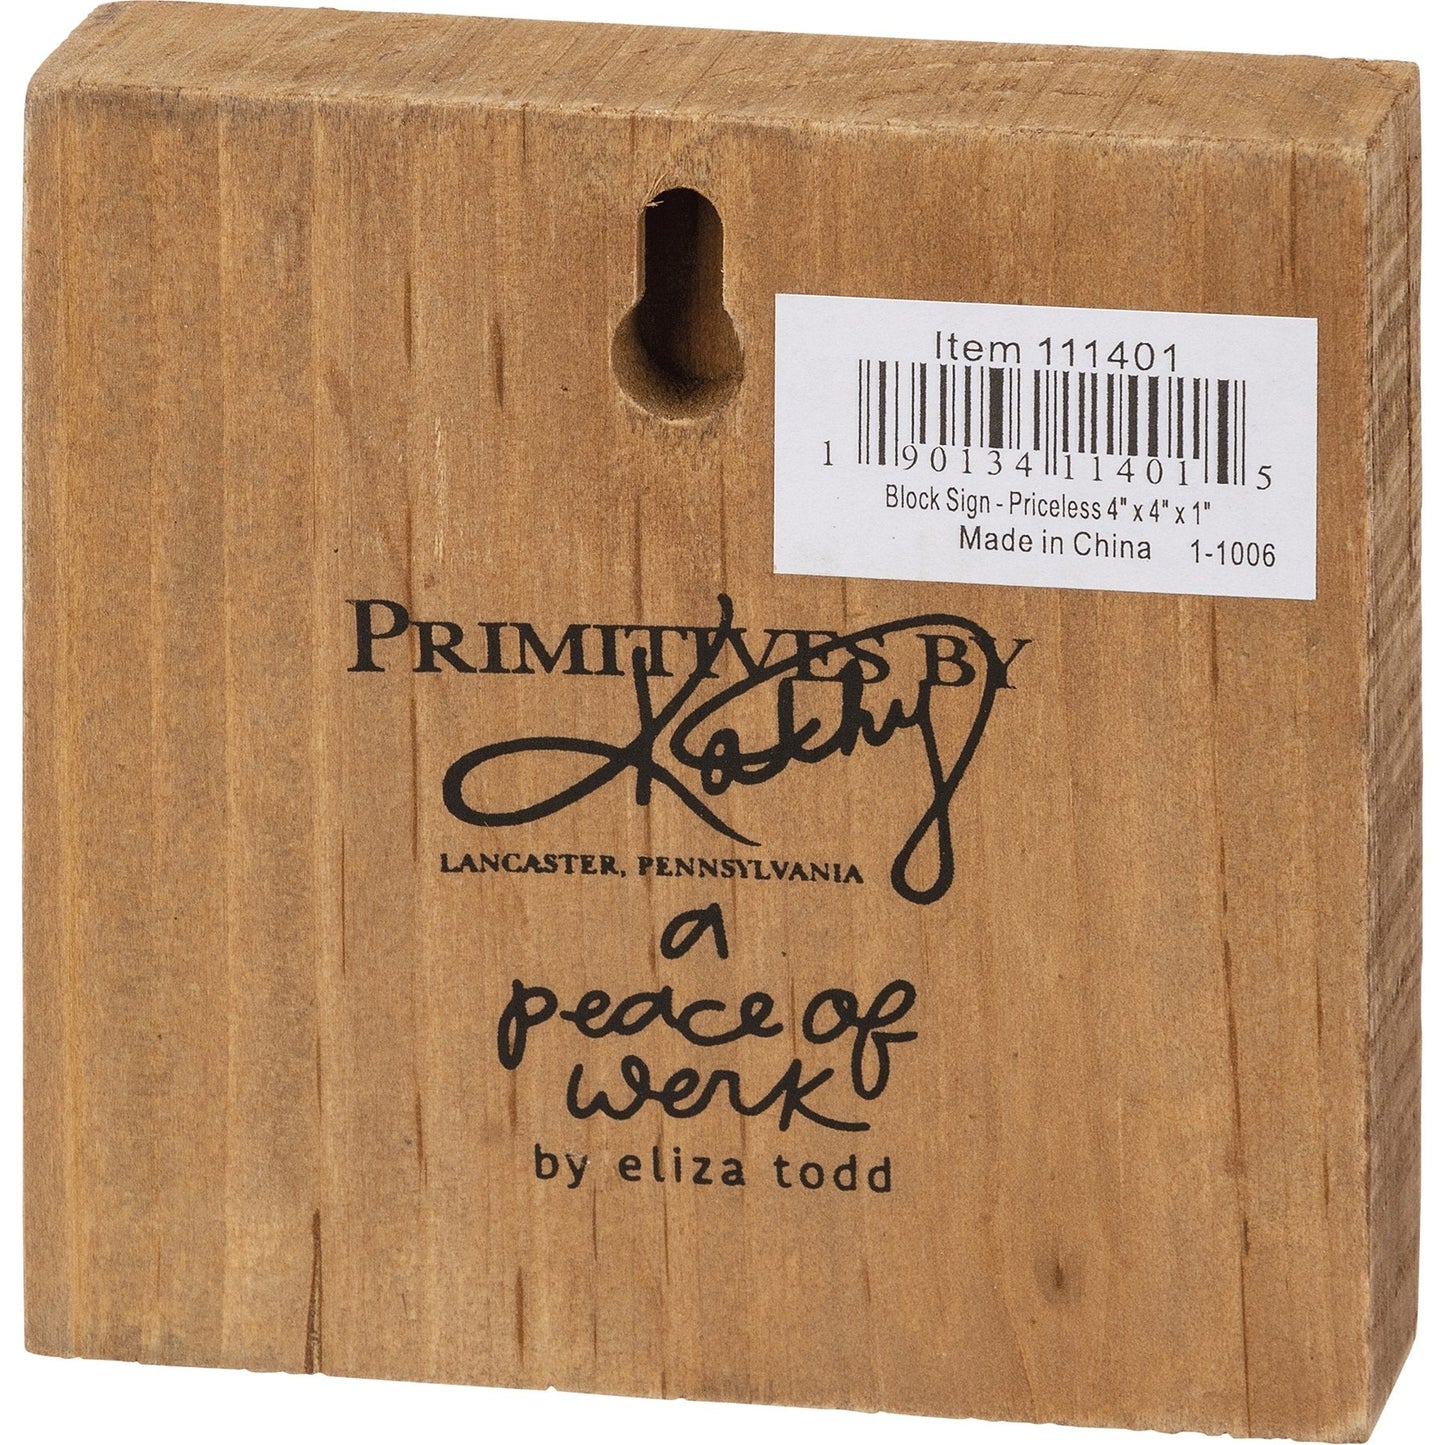 Kindness Equal Parts Free And Priceless Wooden Block Sign | 4" x 4"